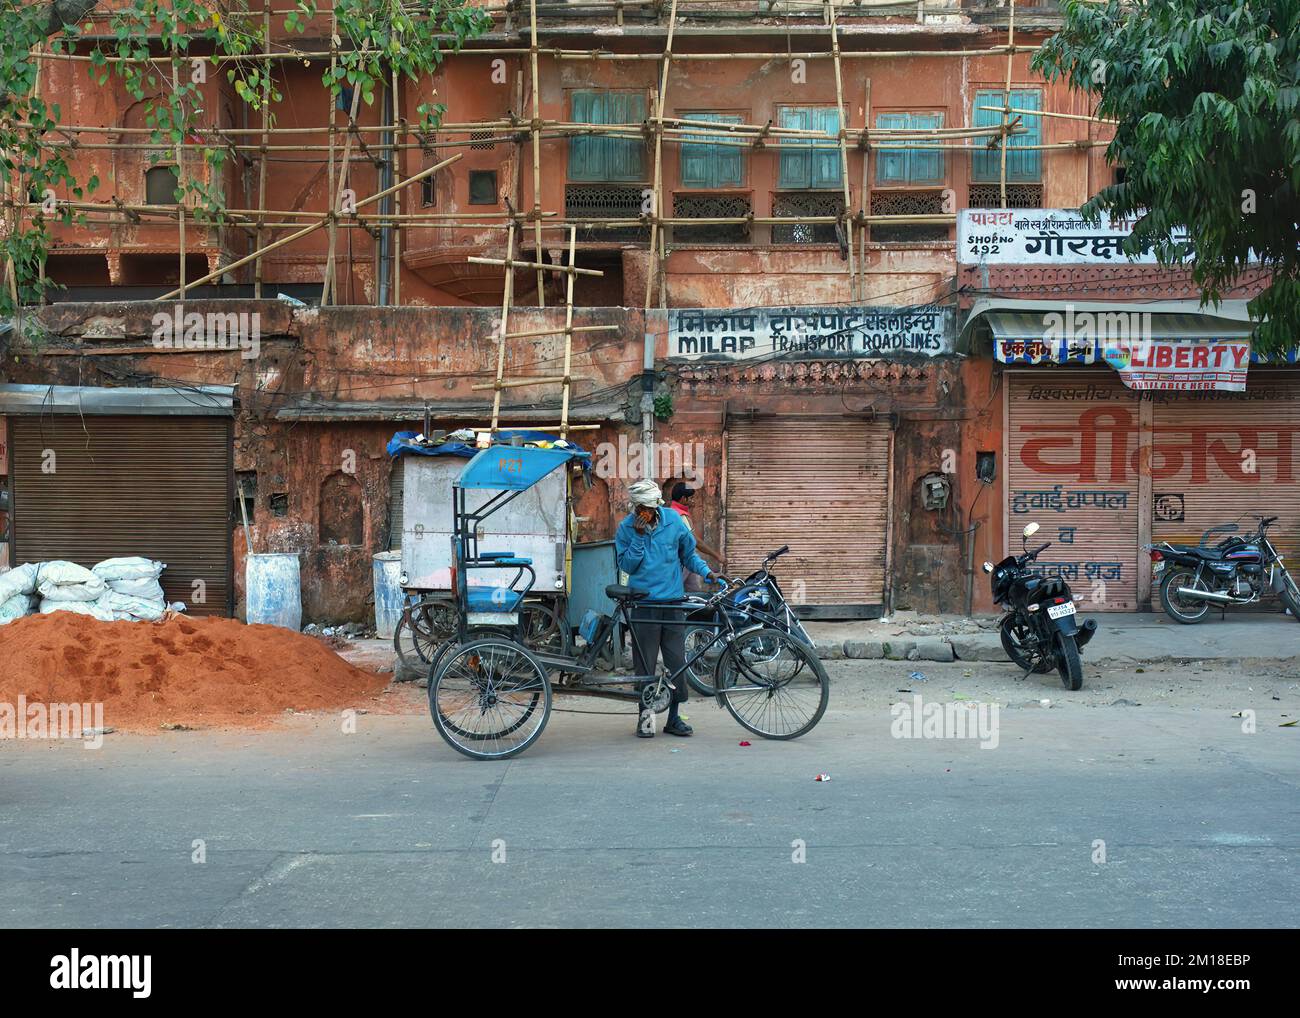 Bicycle Taxi by a Construction site - Jaipur, India Stock Photo